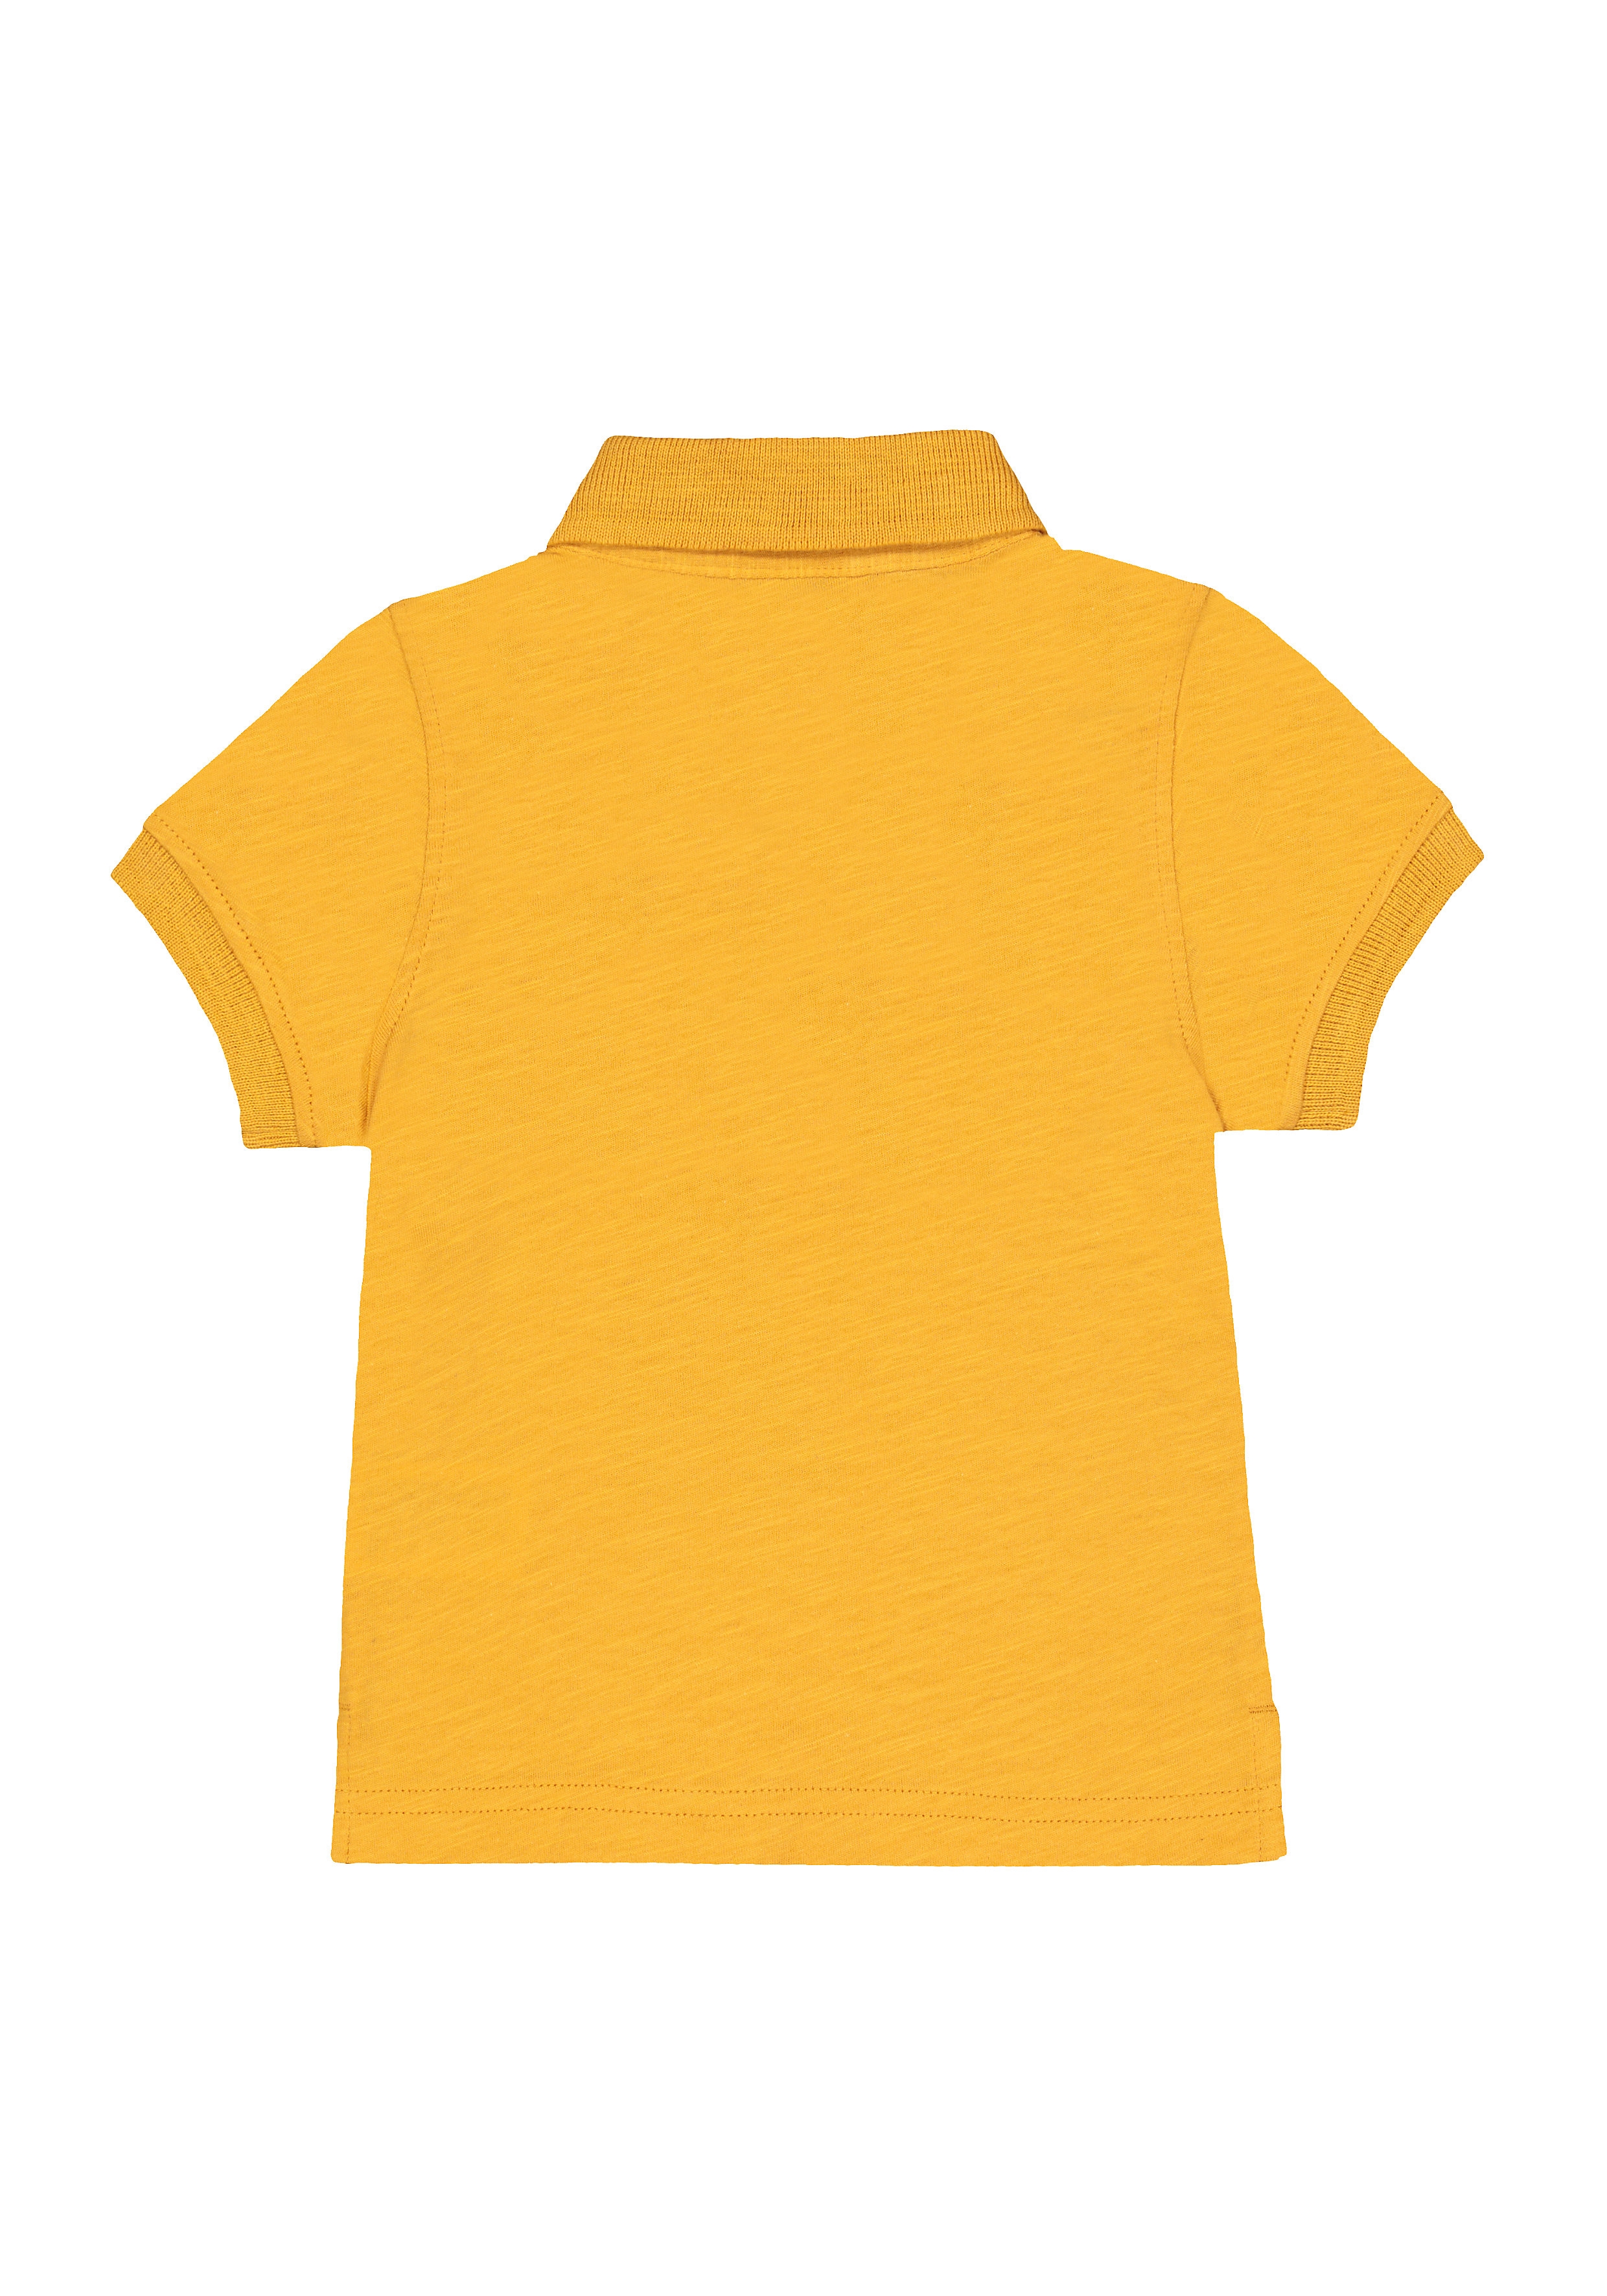 Mothercare | Yellow Striped T-Shirt 1